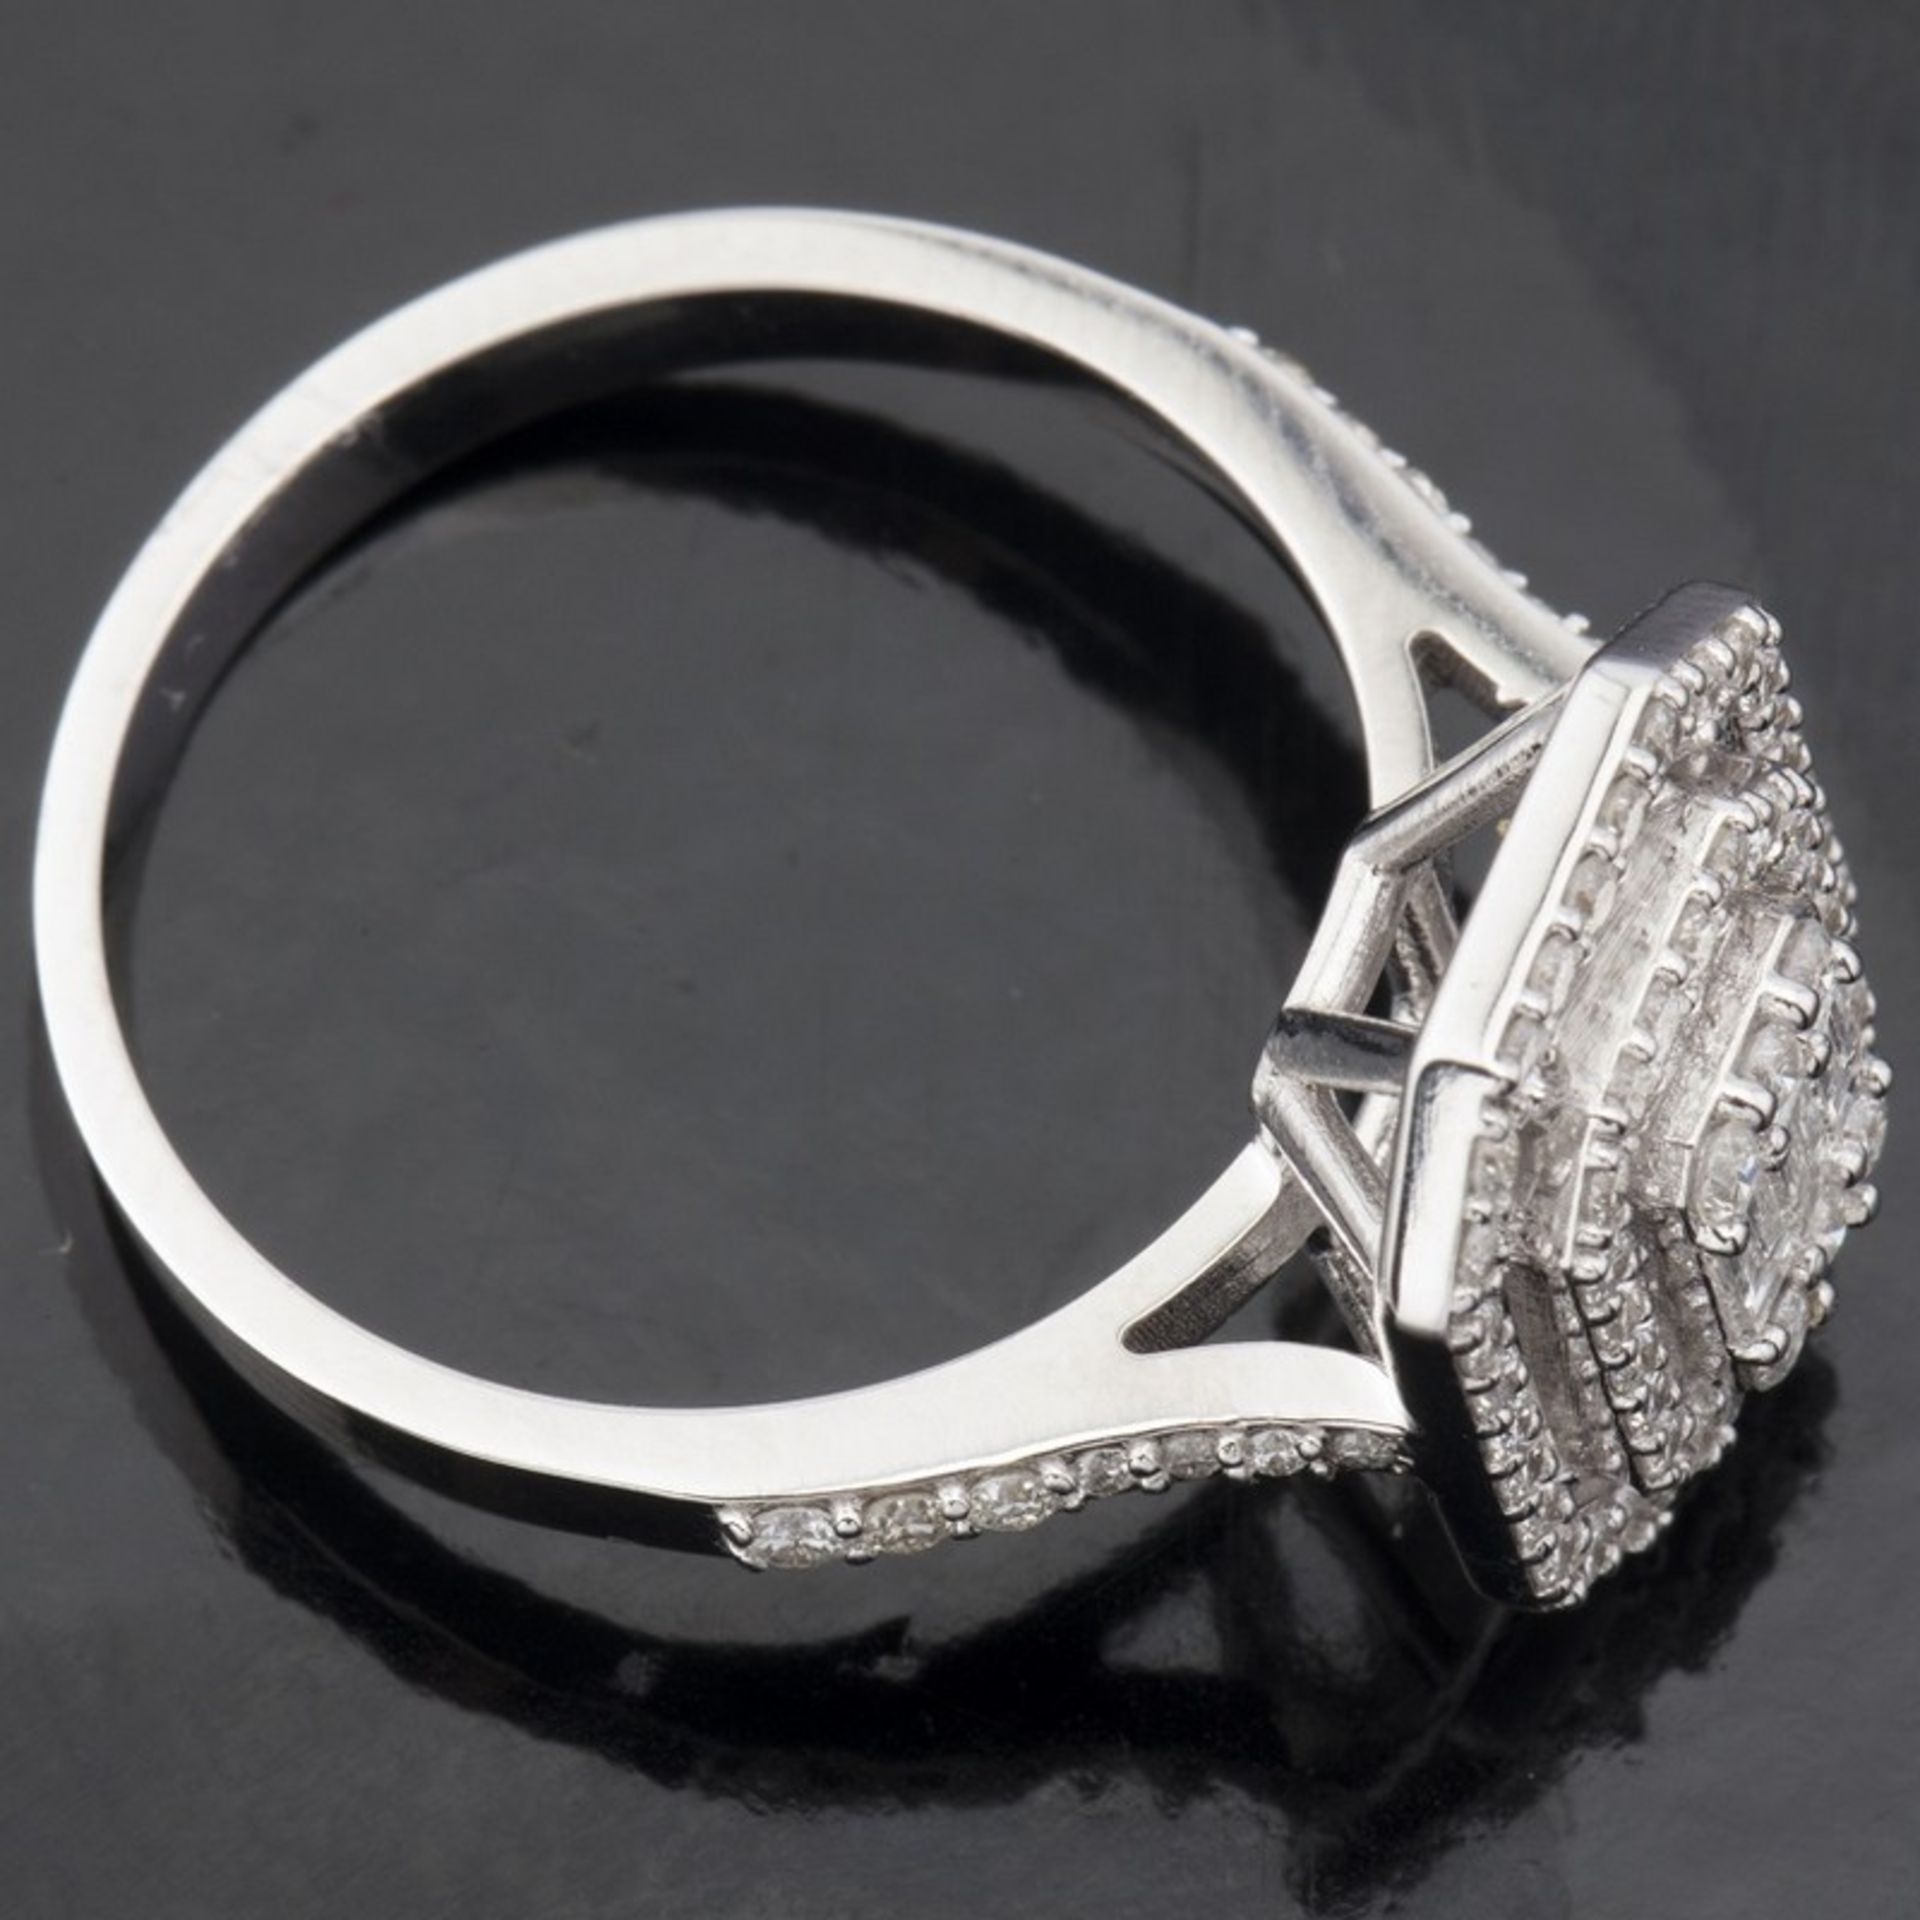 Certificated 14K White Gold Diamond Ring - Image 4 of 6